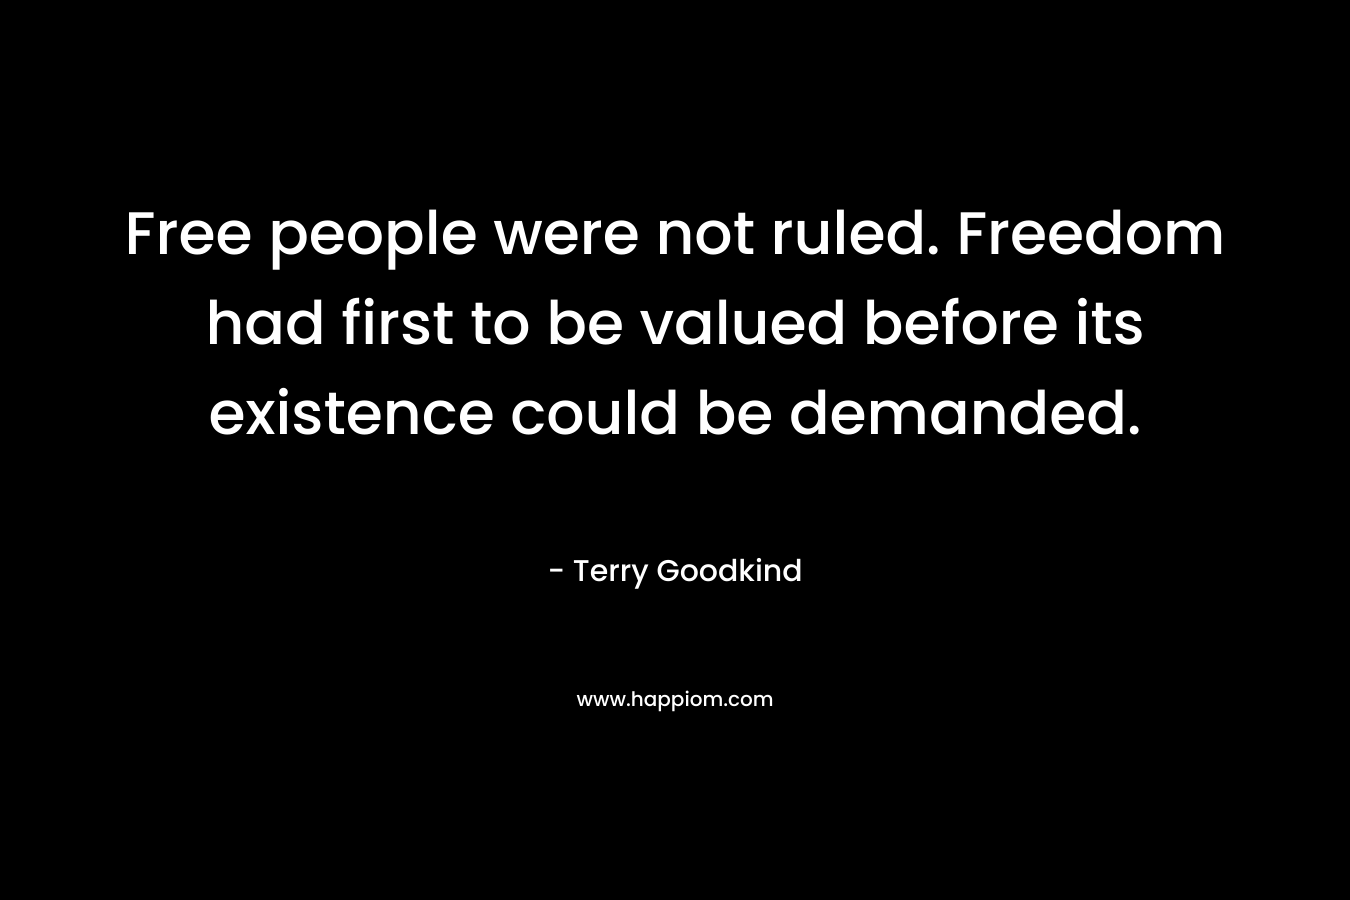 Free people were not ruled. Freedom had first to be valued before its existence could be demanded.